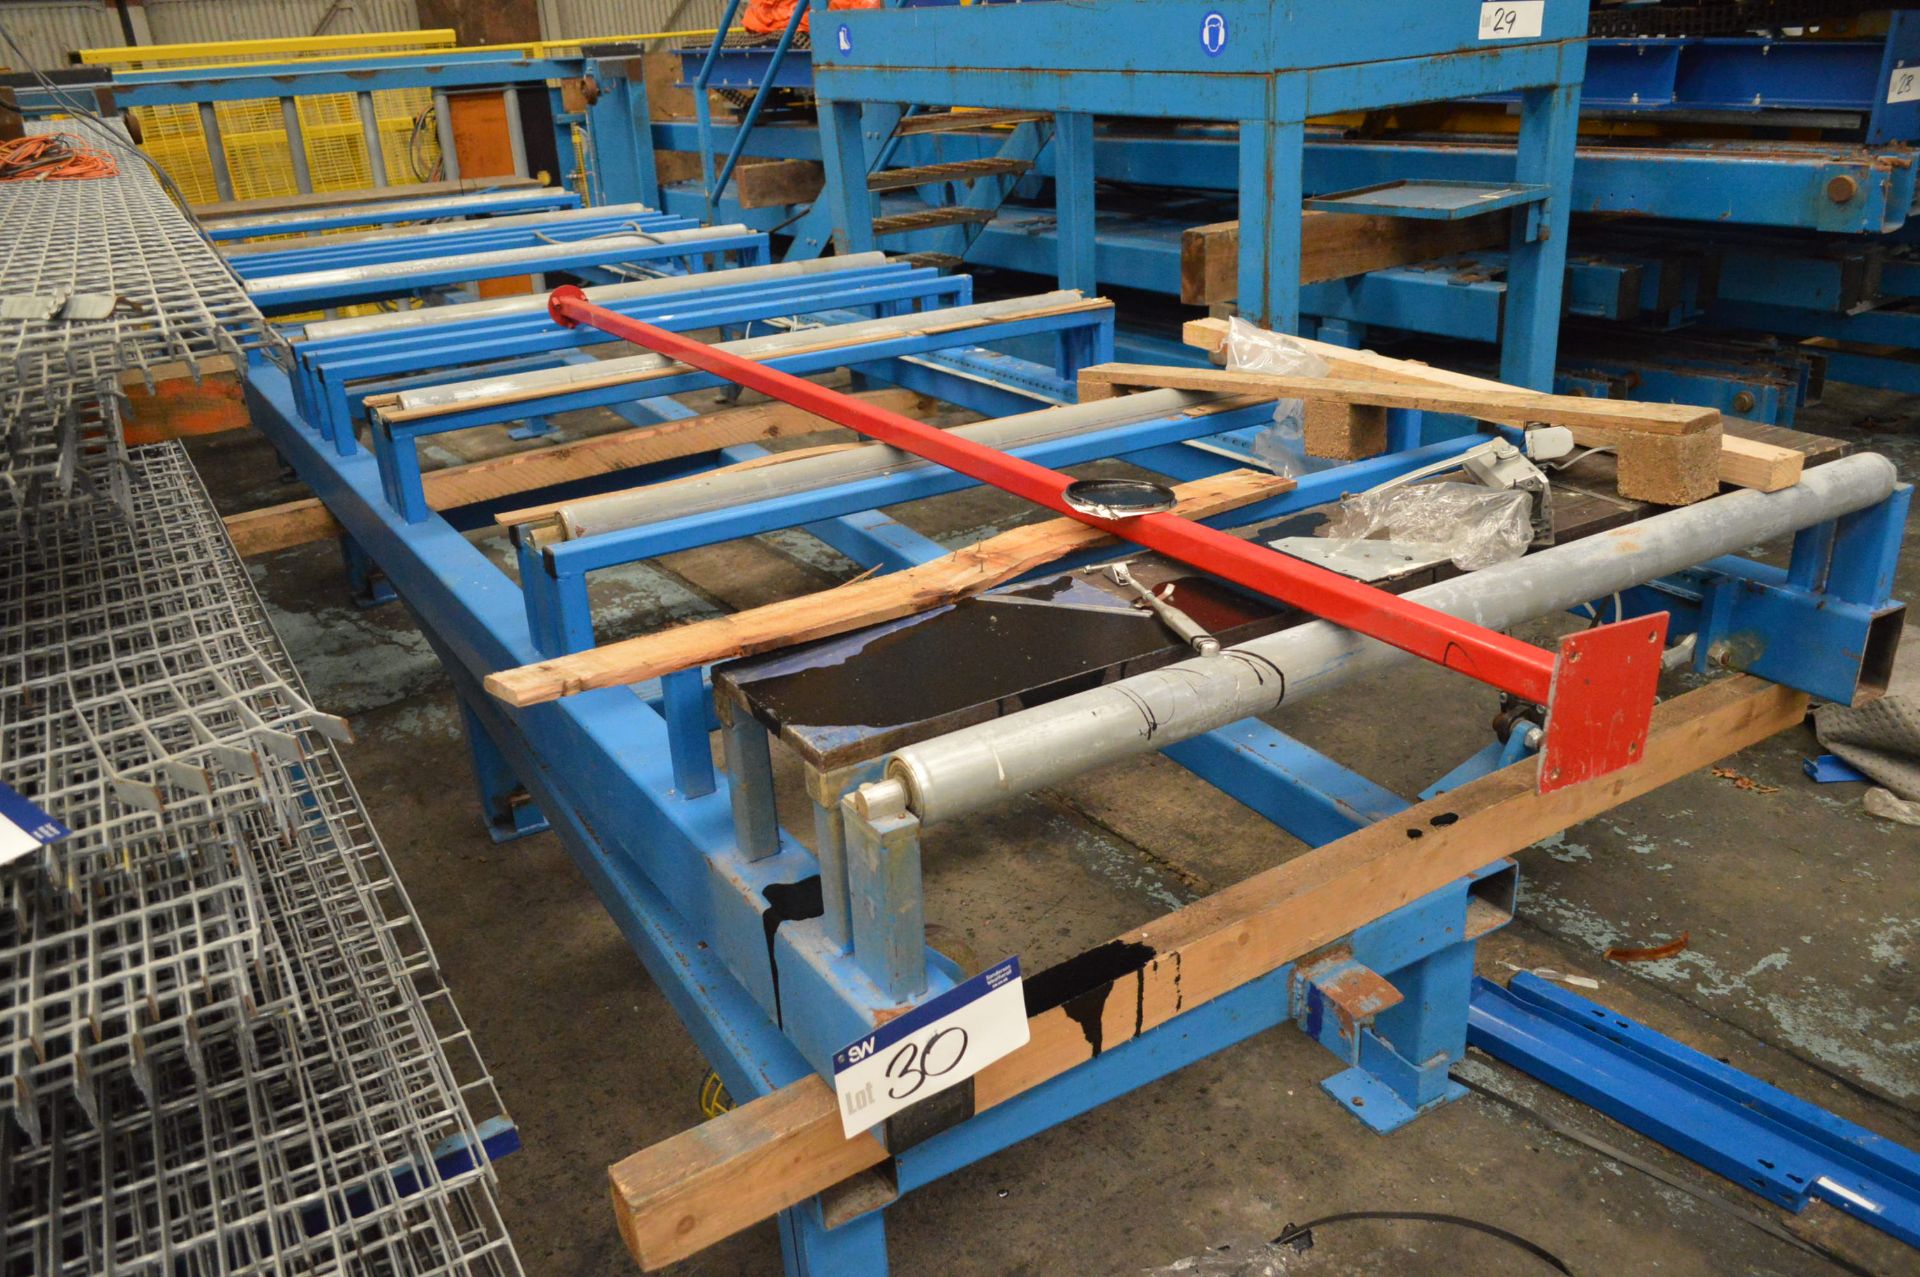 Roller Conveyor, approx. 1.6m wide on rollers x 6.8m long overall, with fabricated steel stand